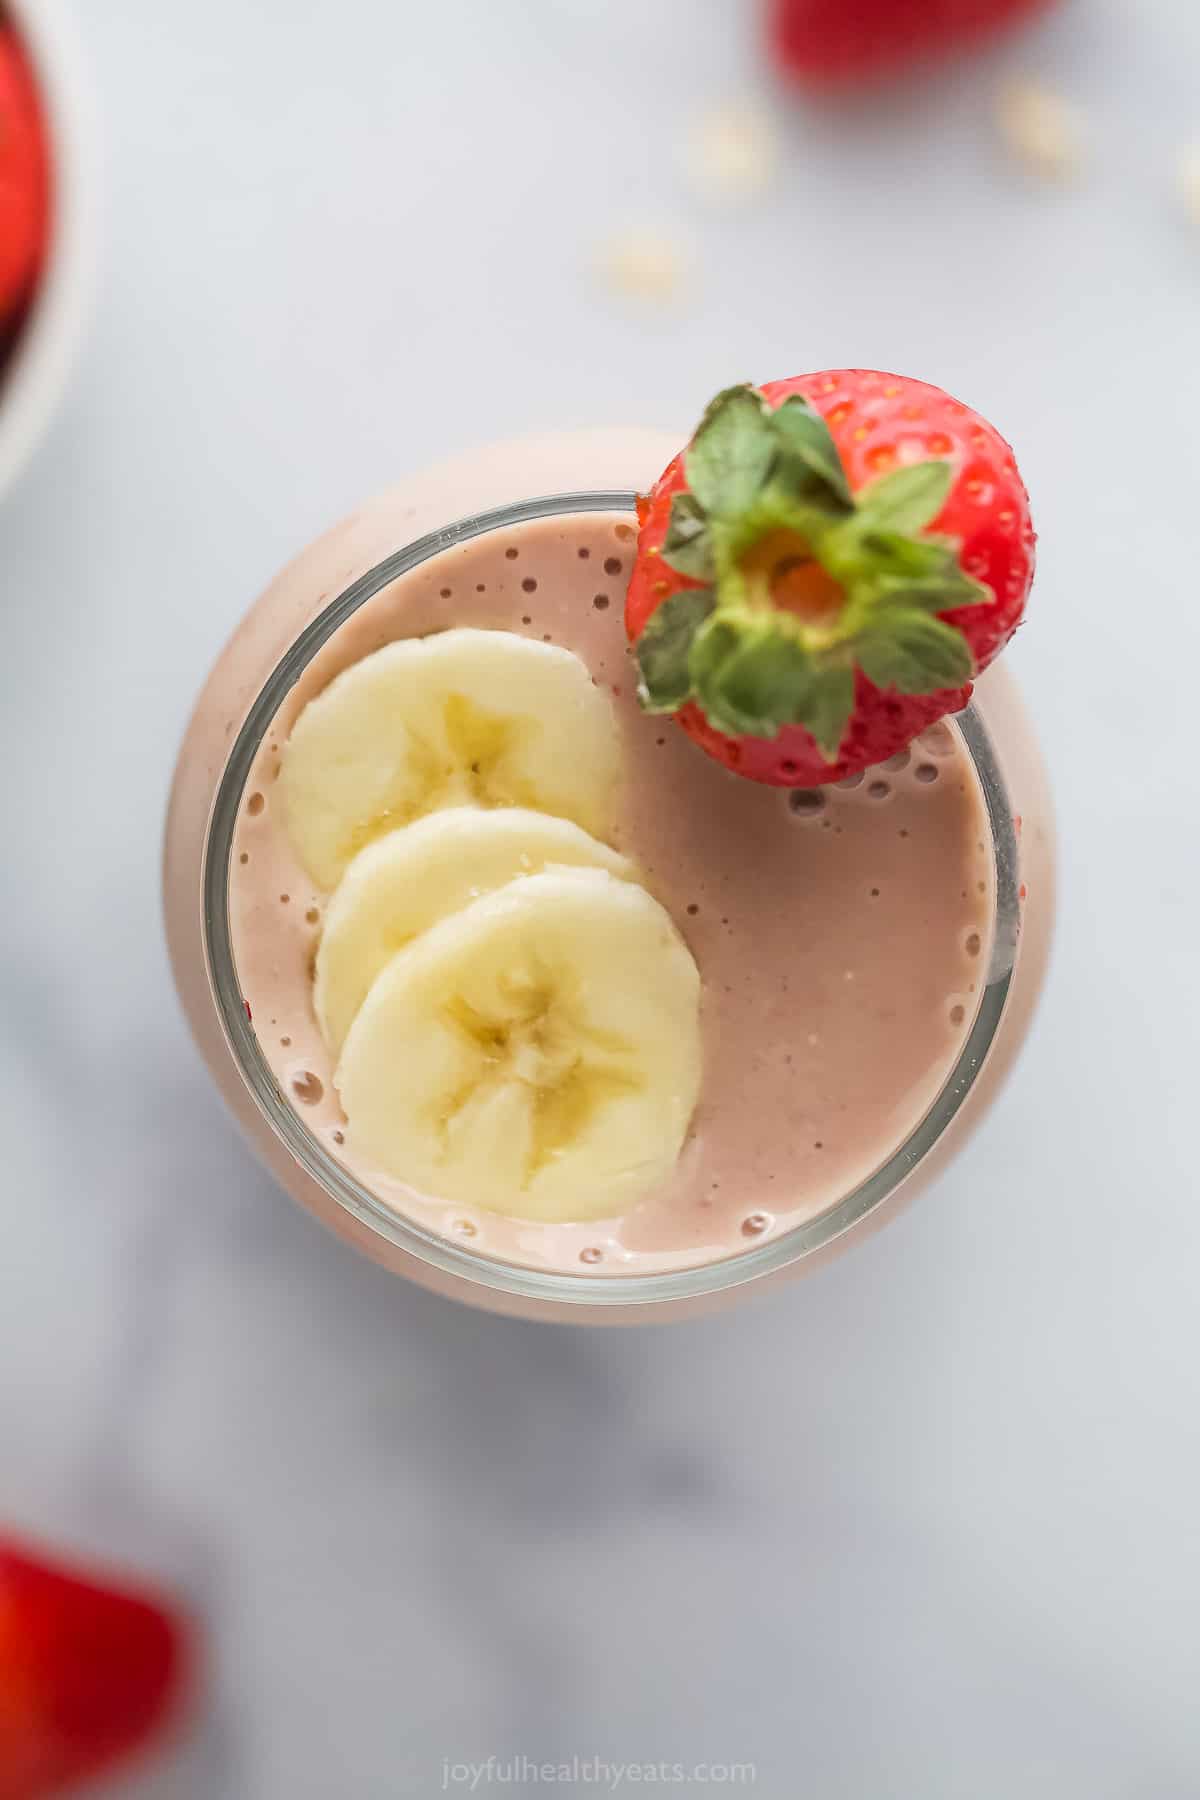 A strawberry banana smoothie in a large glass shown from the top